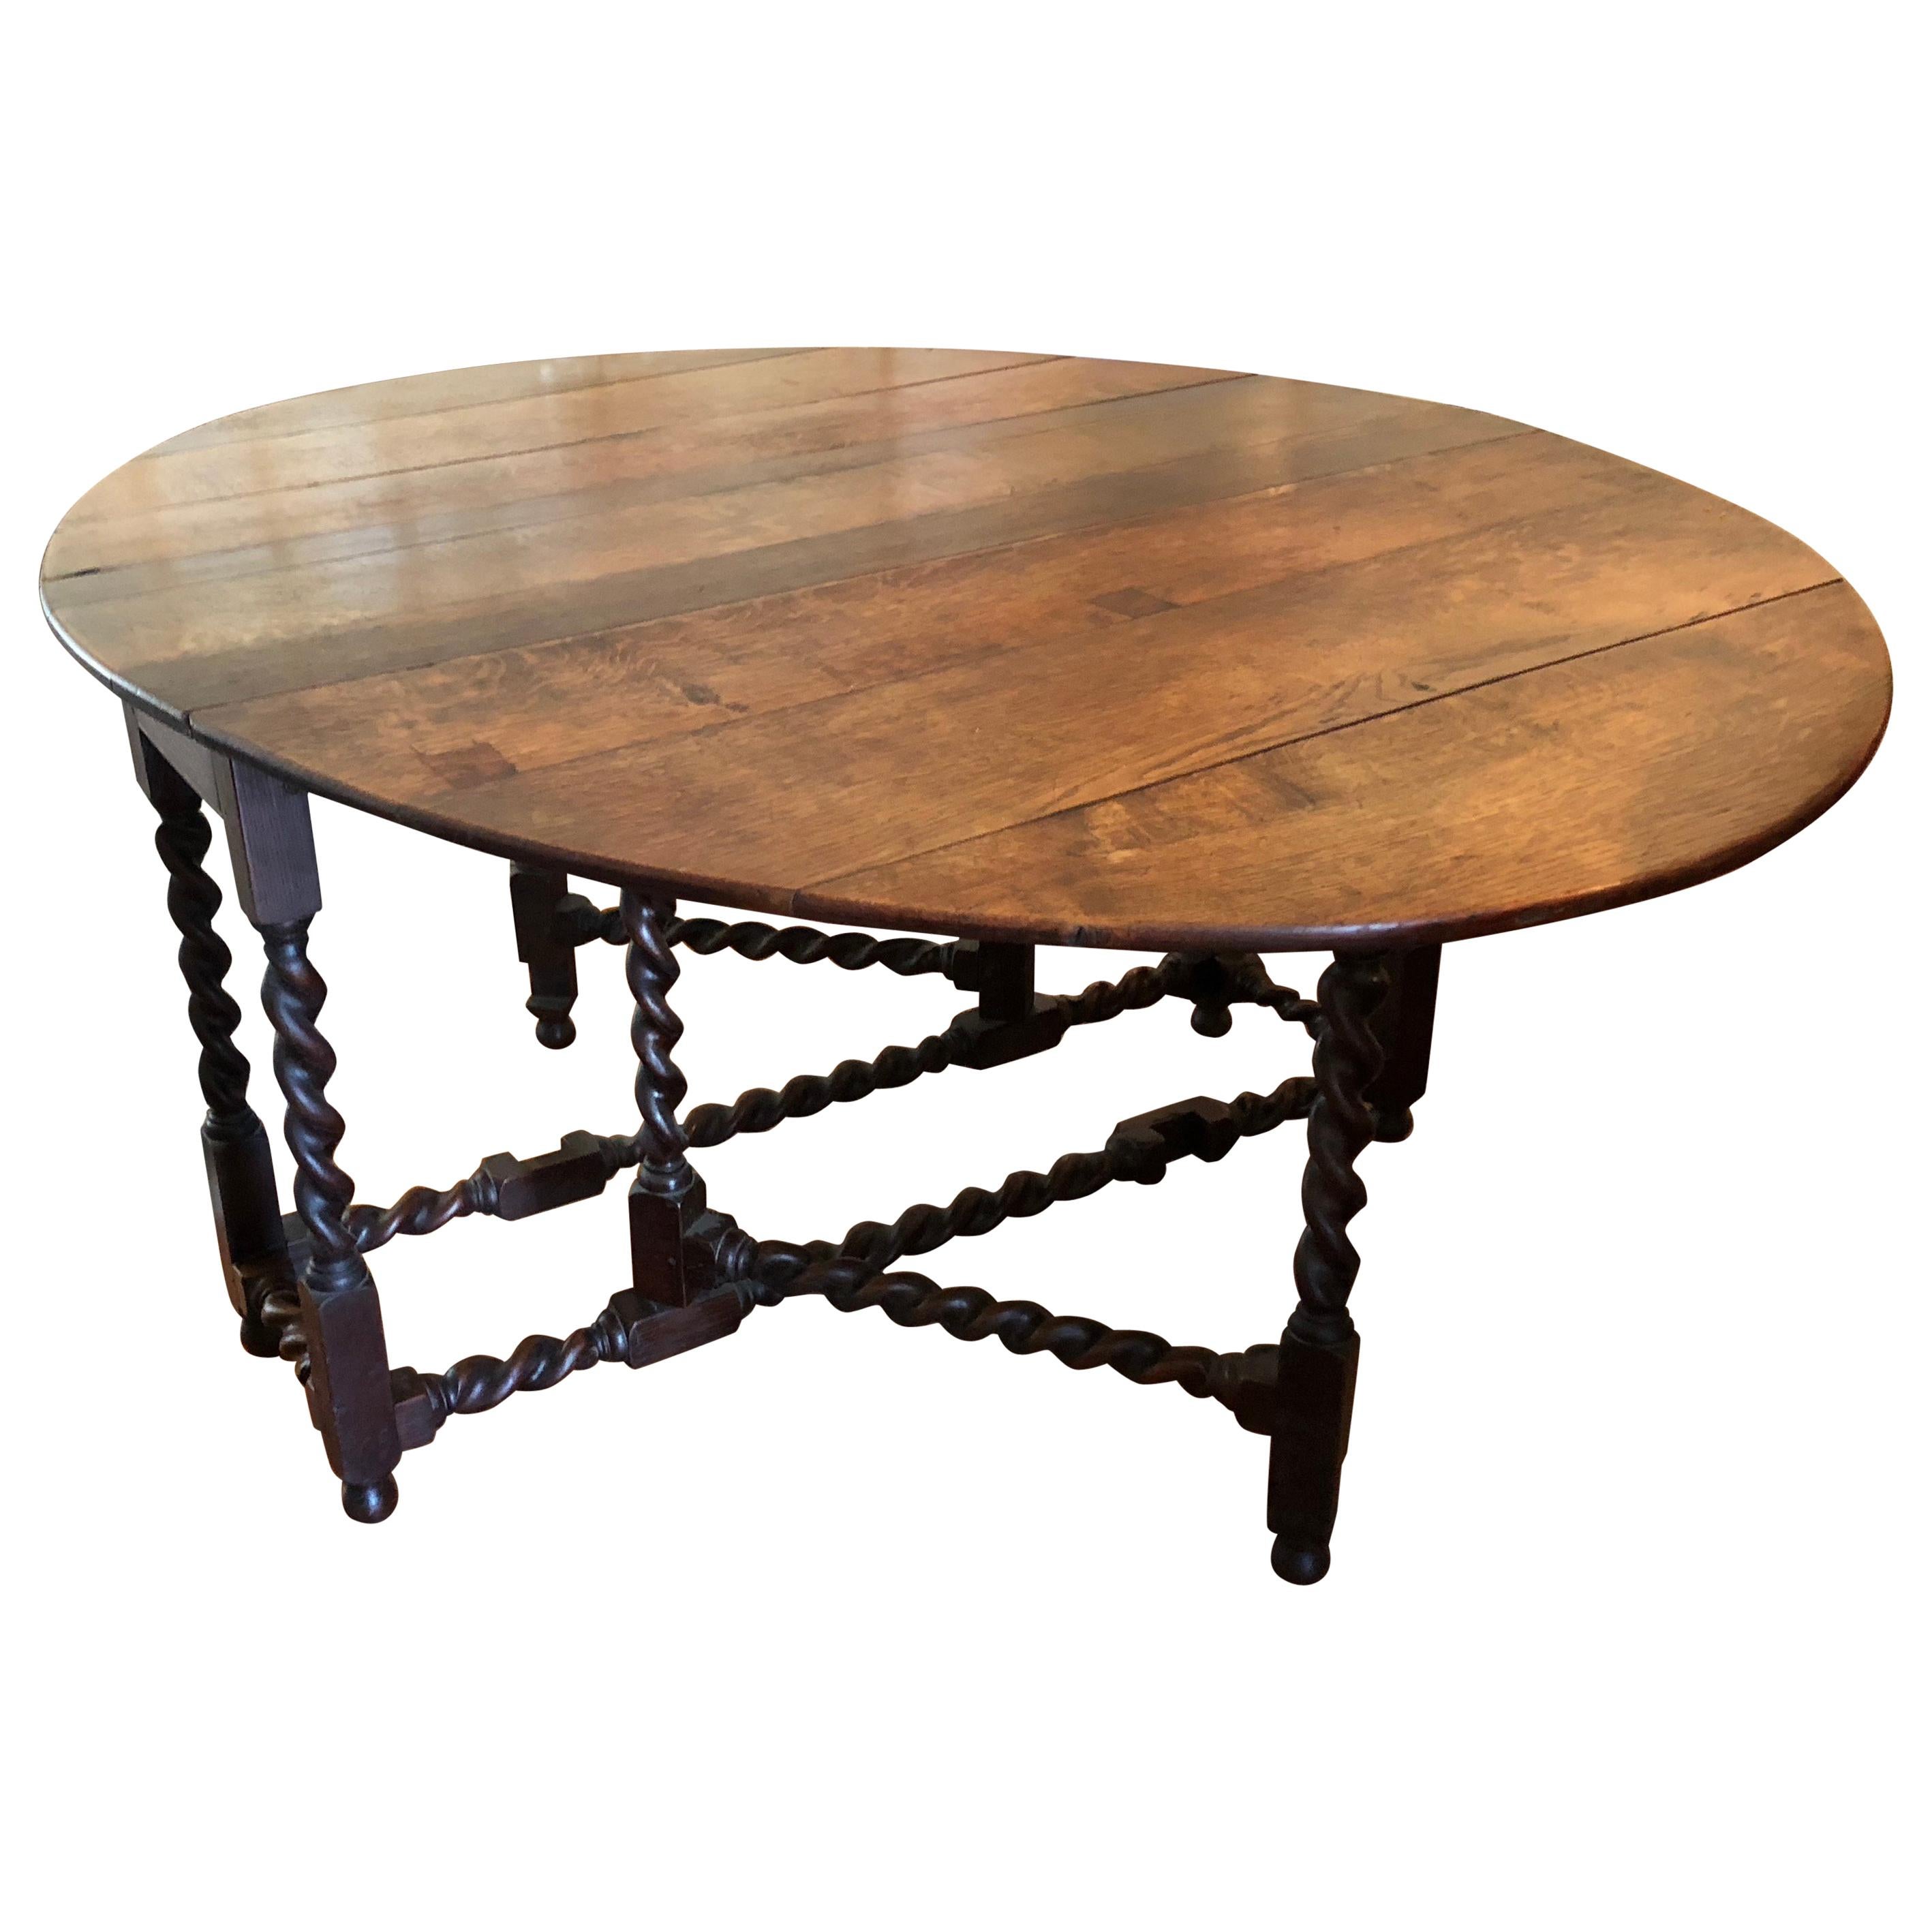 19th Century Gateleg Table with Spiral Turned Legs